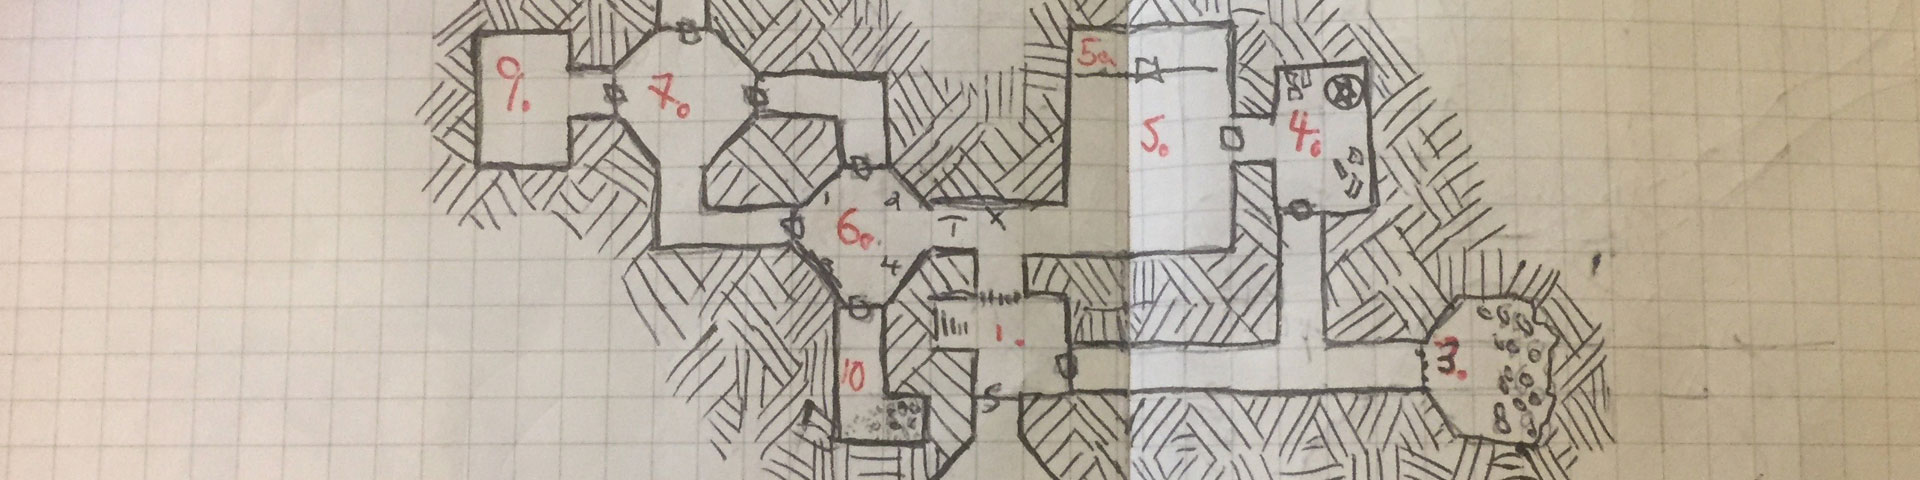 A small conventional graph paper dungeon featuring blocks, hexagons, and connecting passages.